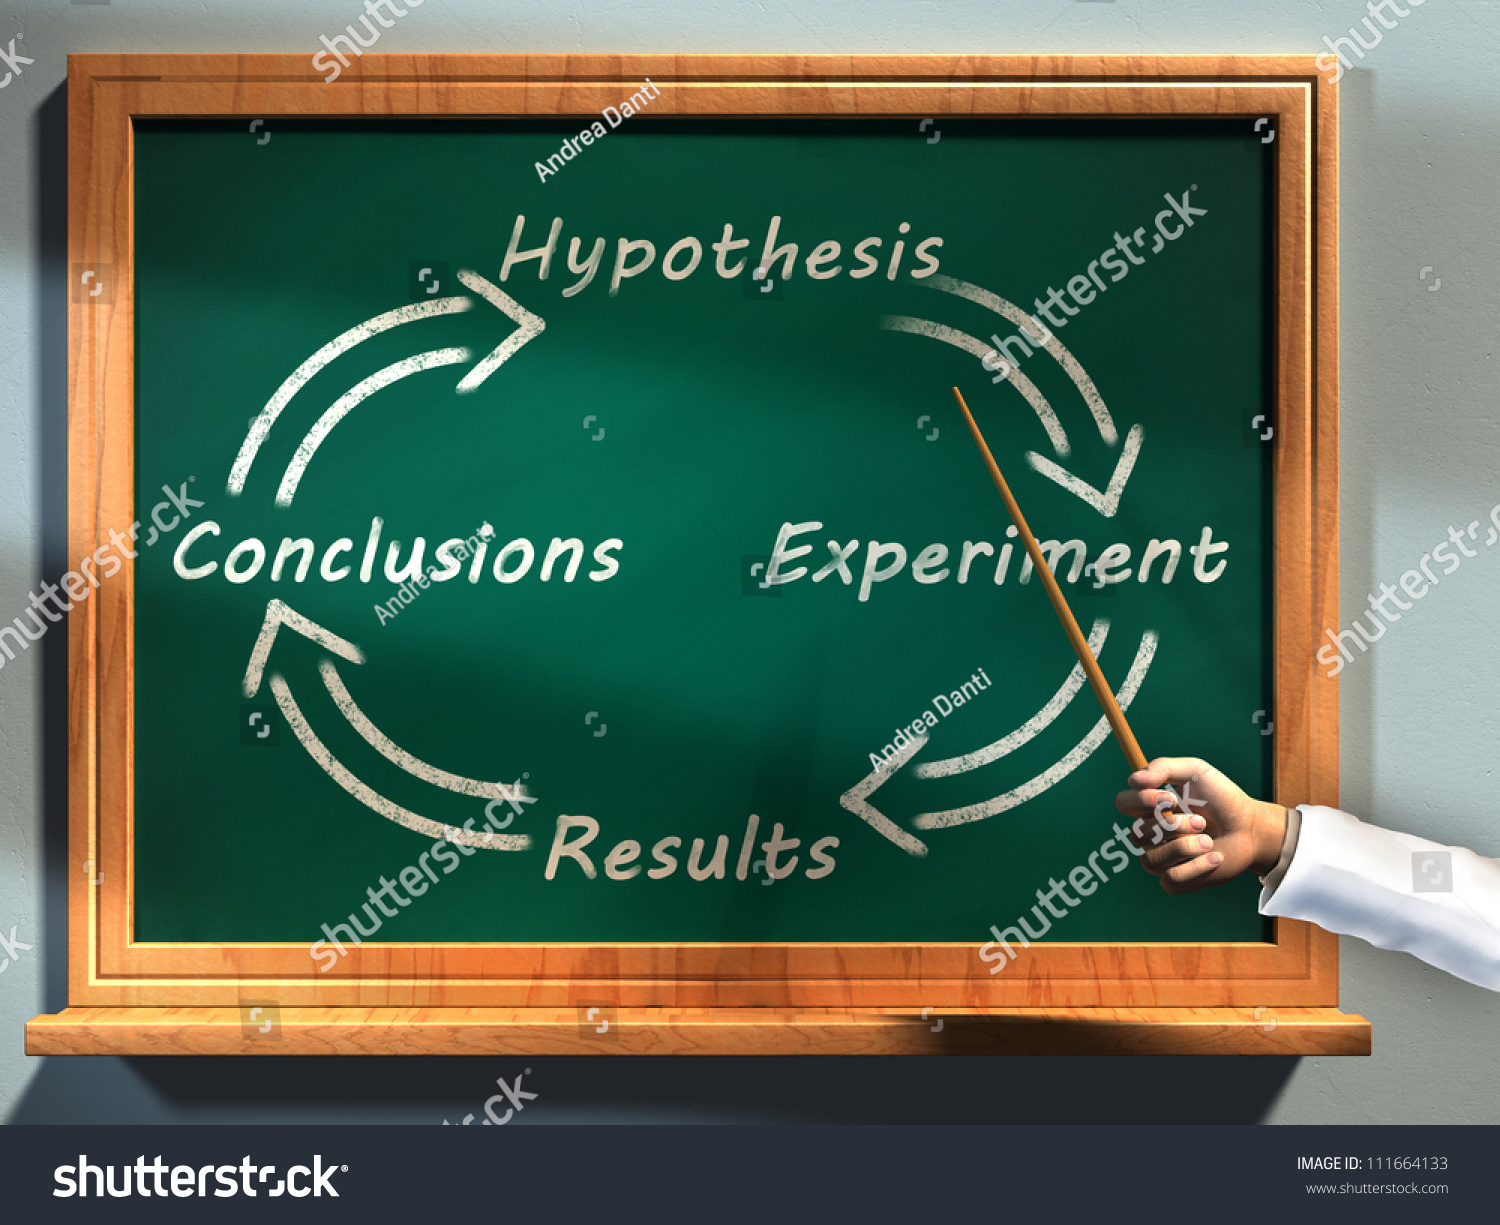 Why do scientists use the scientific method?